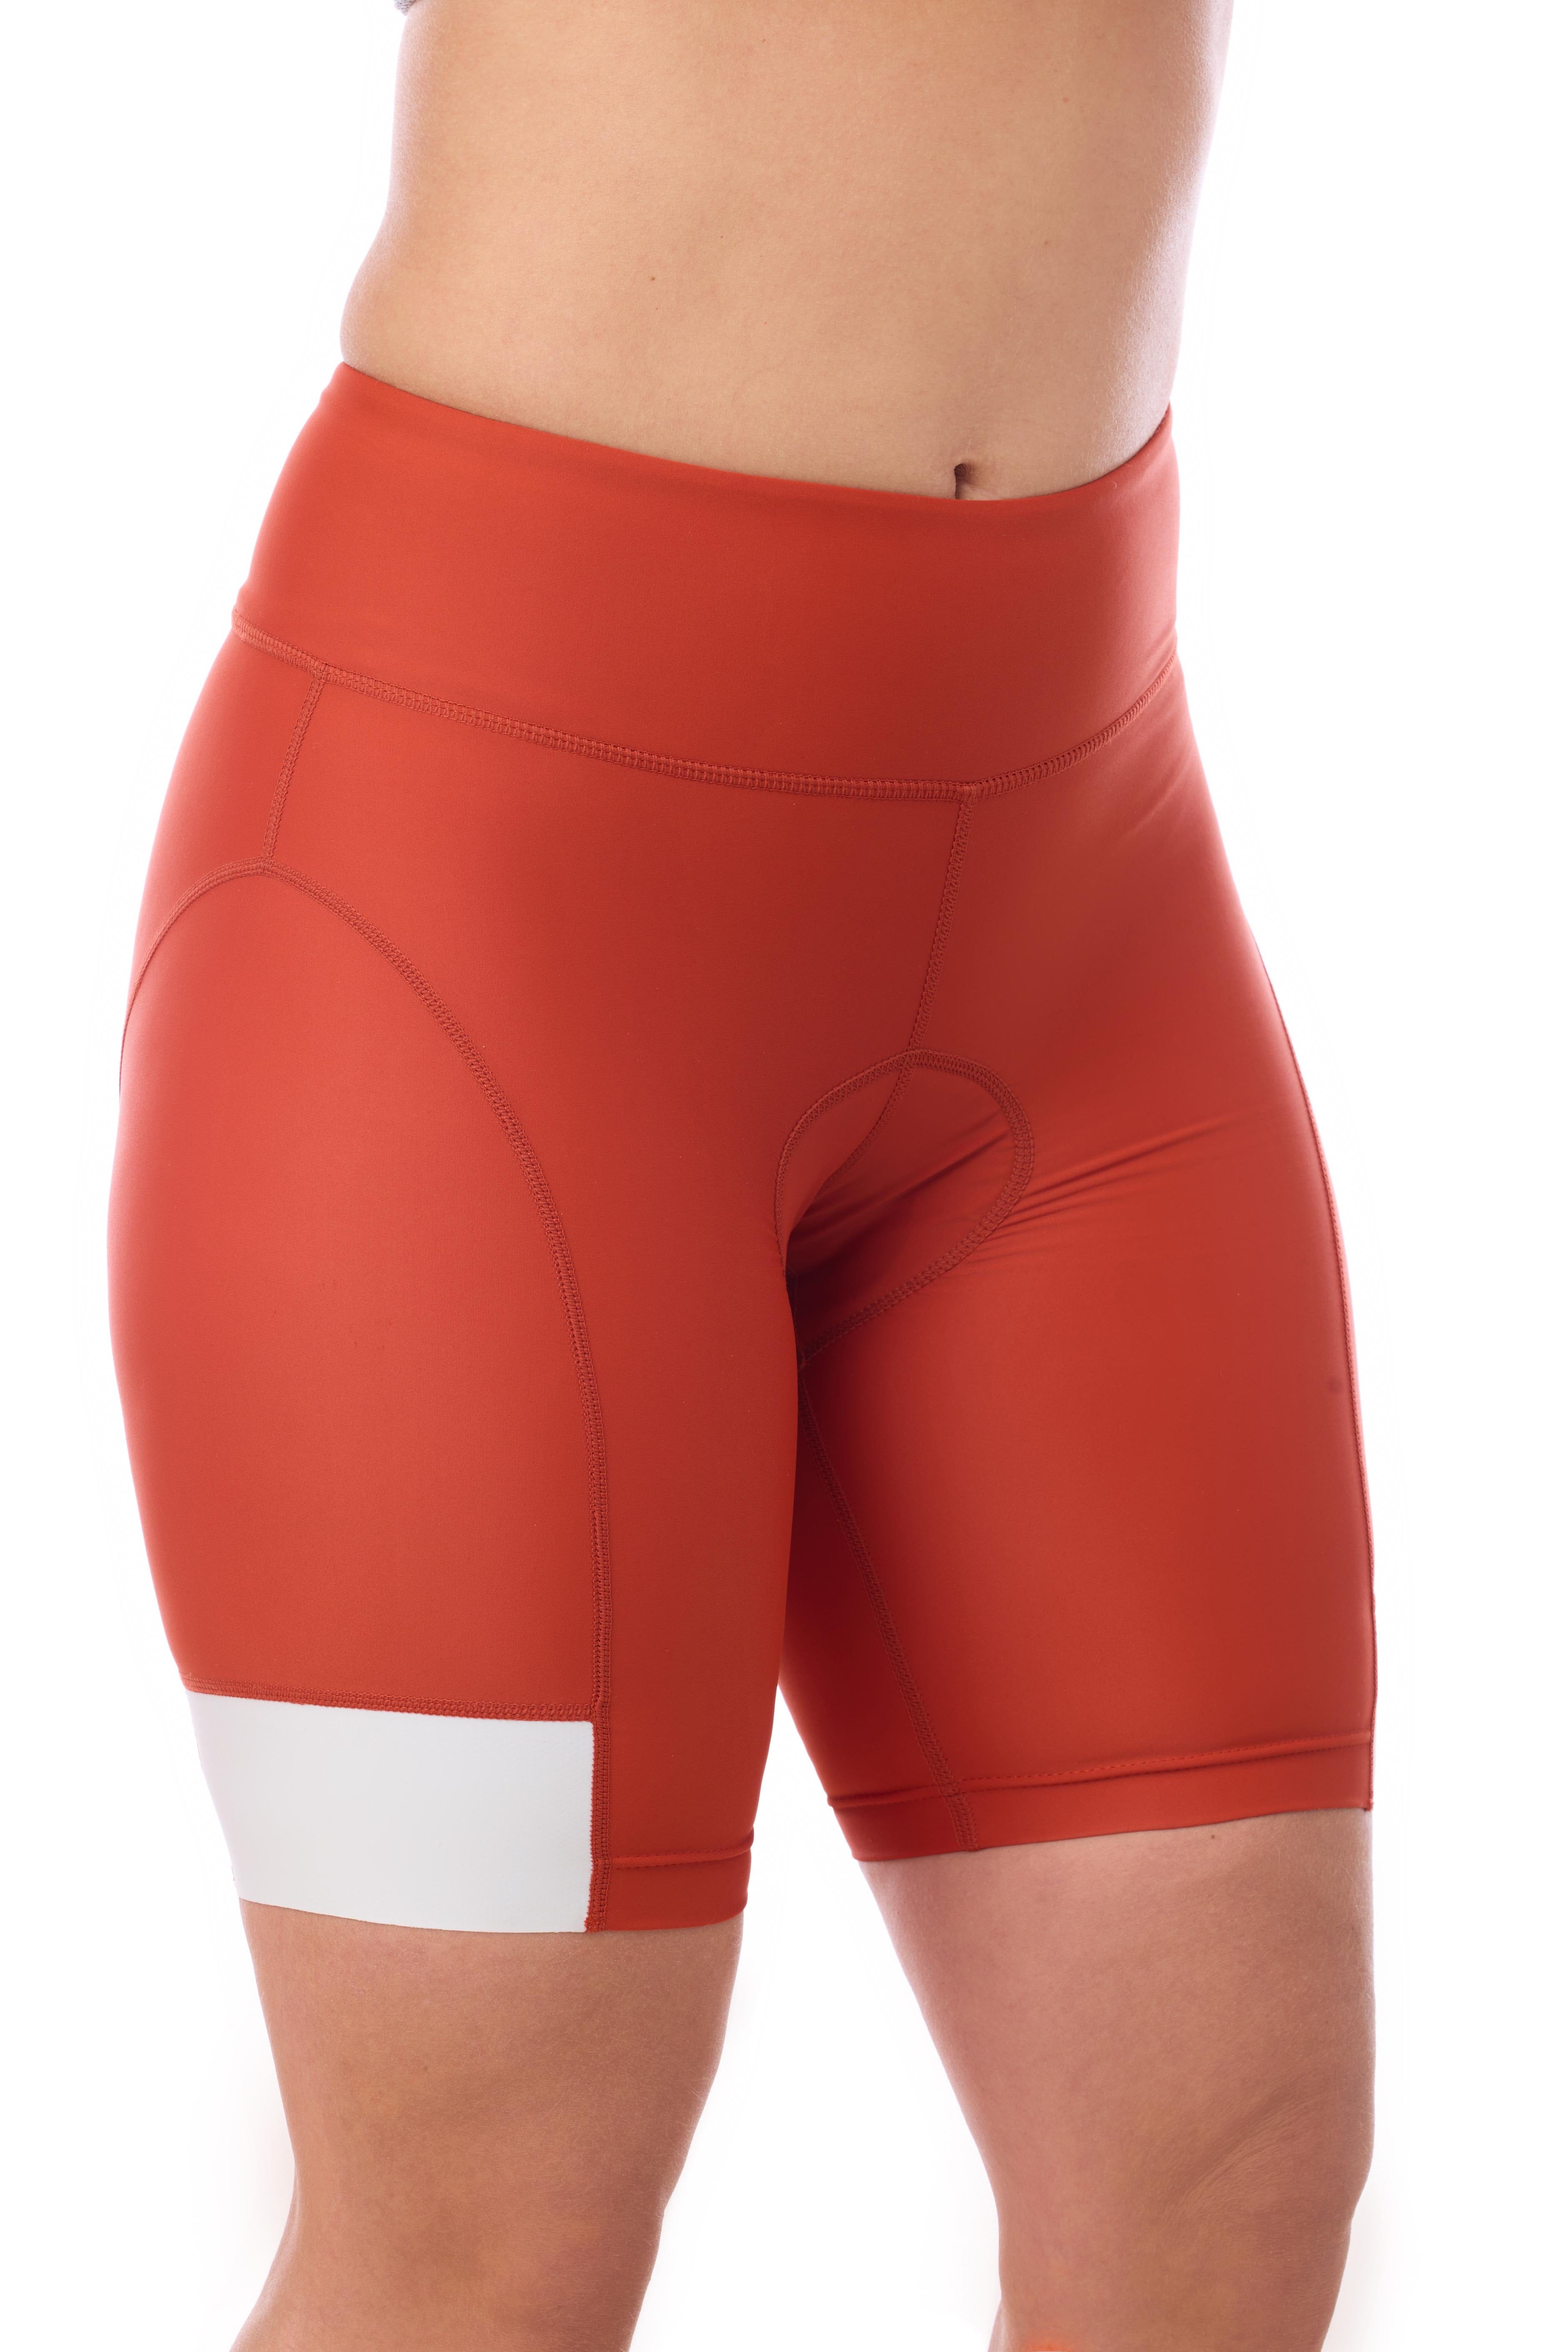 JolieRide Cycling shorts women's cycling shorts with anti-shock pad and wide waistband